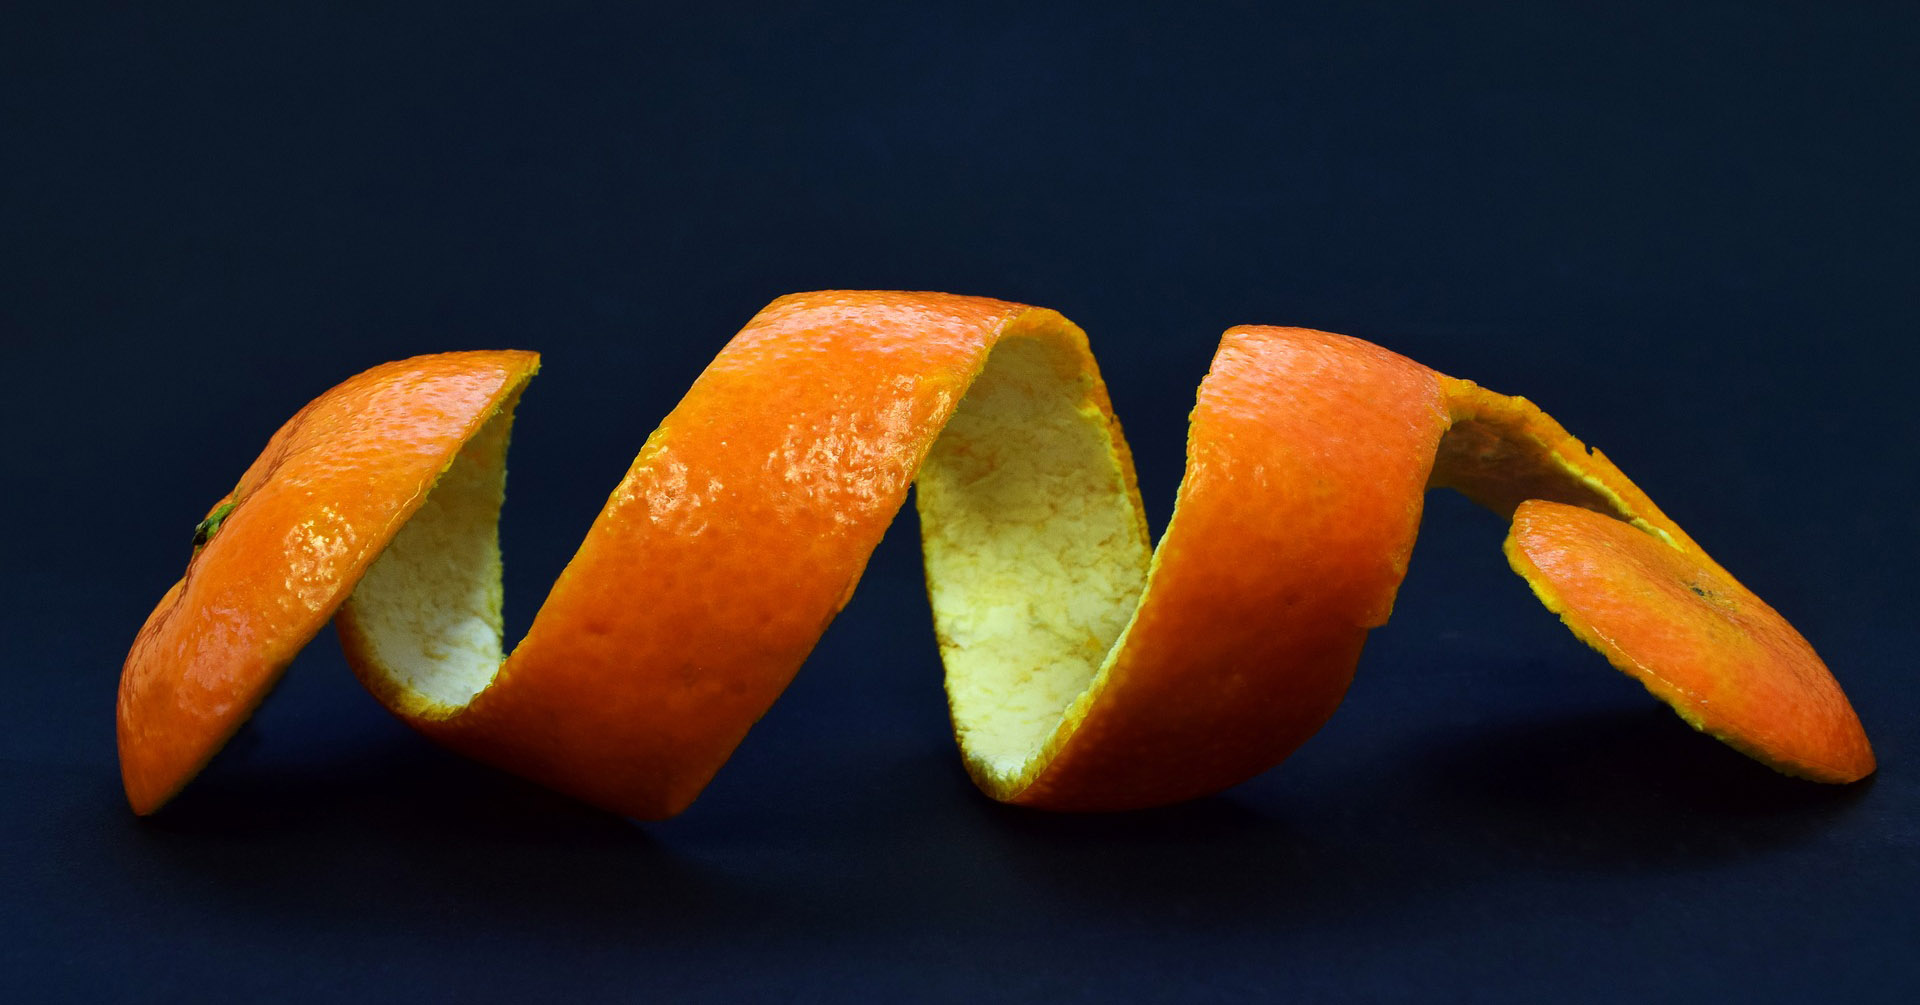  Compounds extracted from citrus peel could become valuable pharmaceuticals.